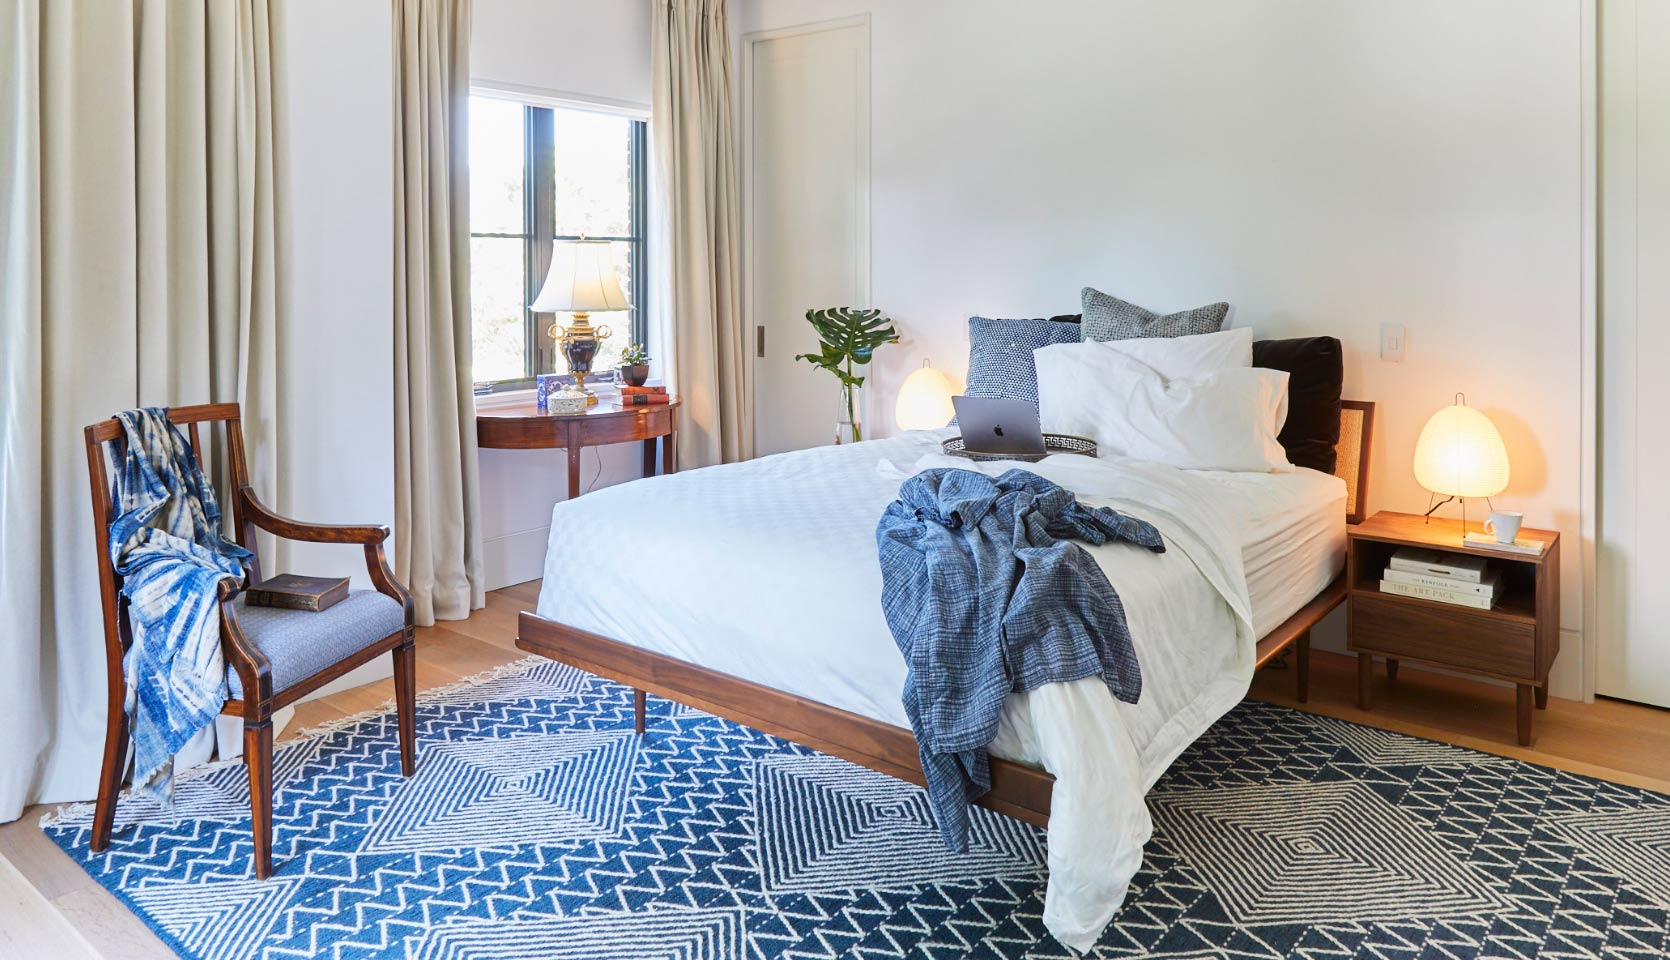 Moore-Park-House-bedroom-with-patterned-blue-and-white-rug